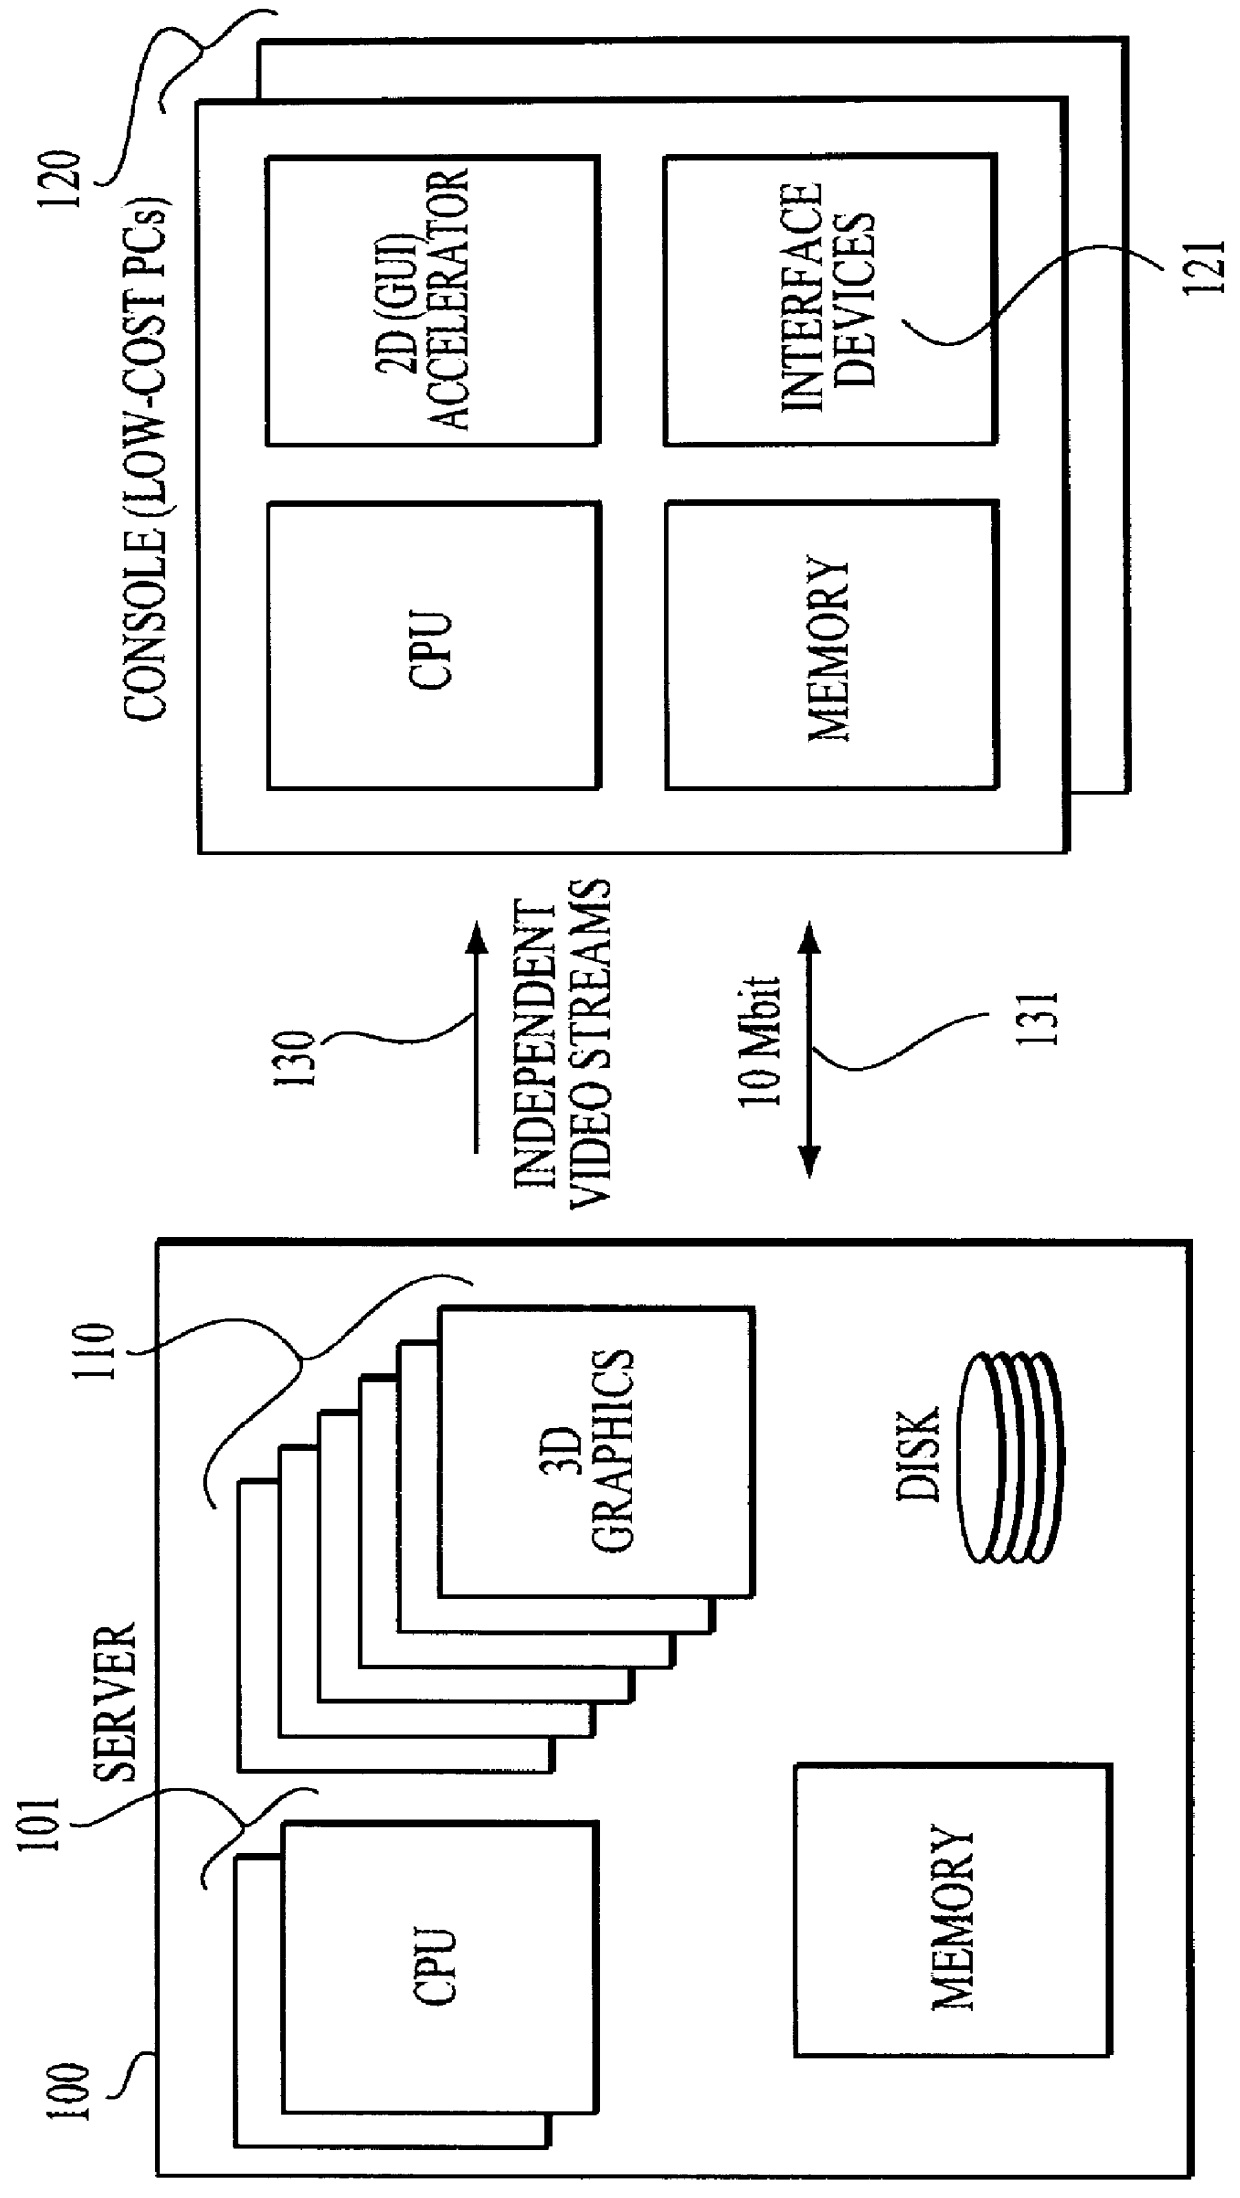 Method for creating lower cost real-time 3D graphics in a distributed environment